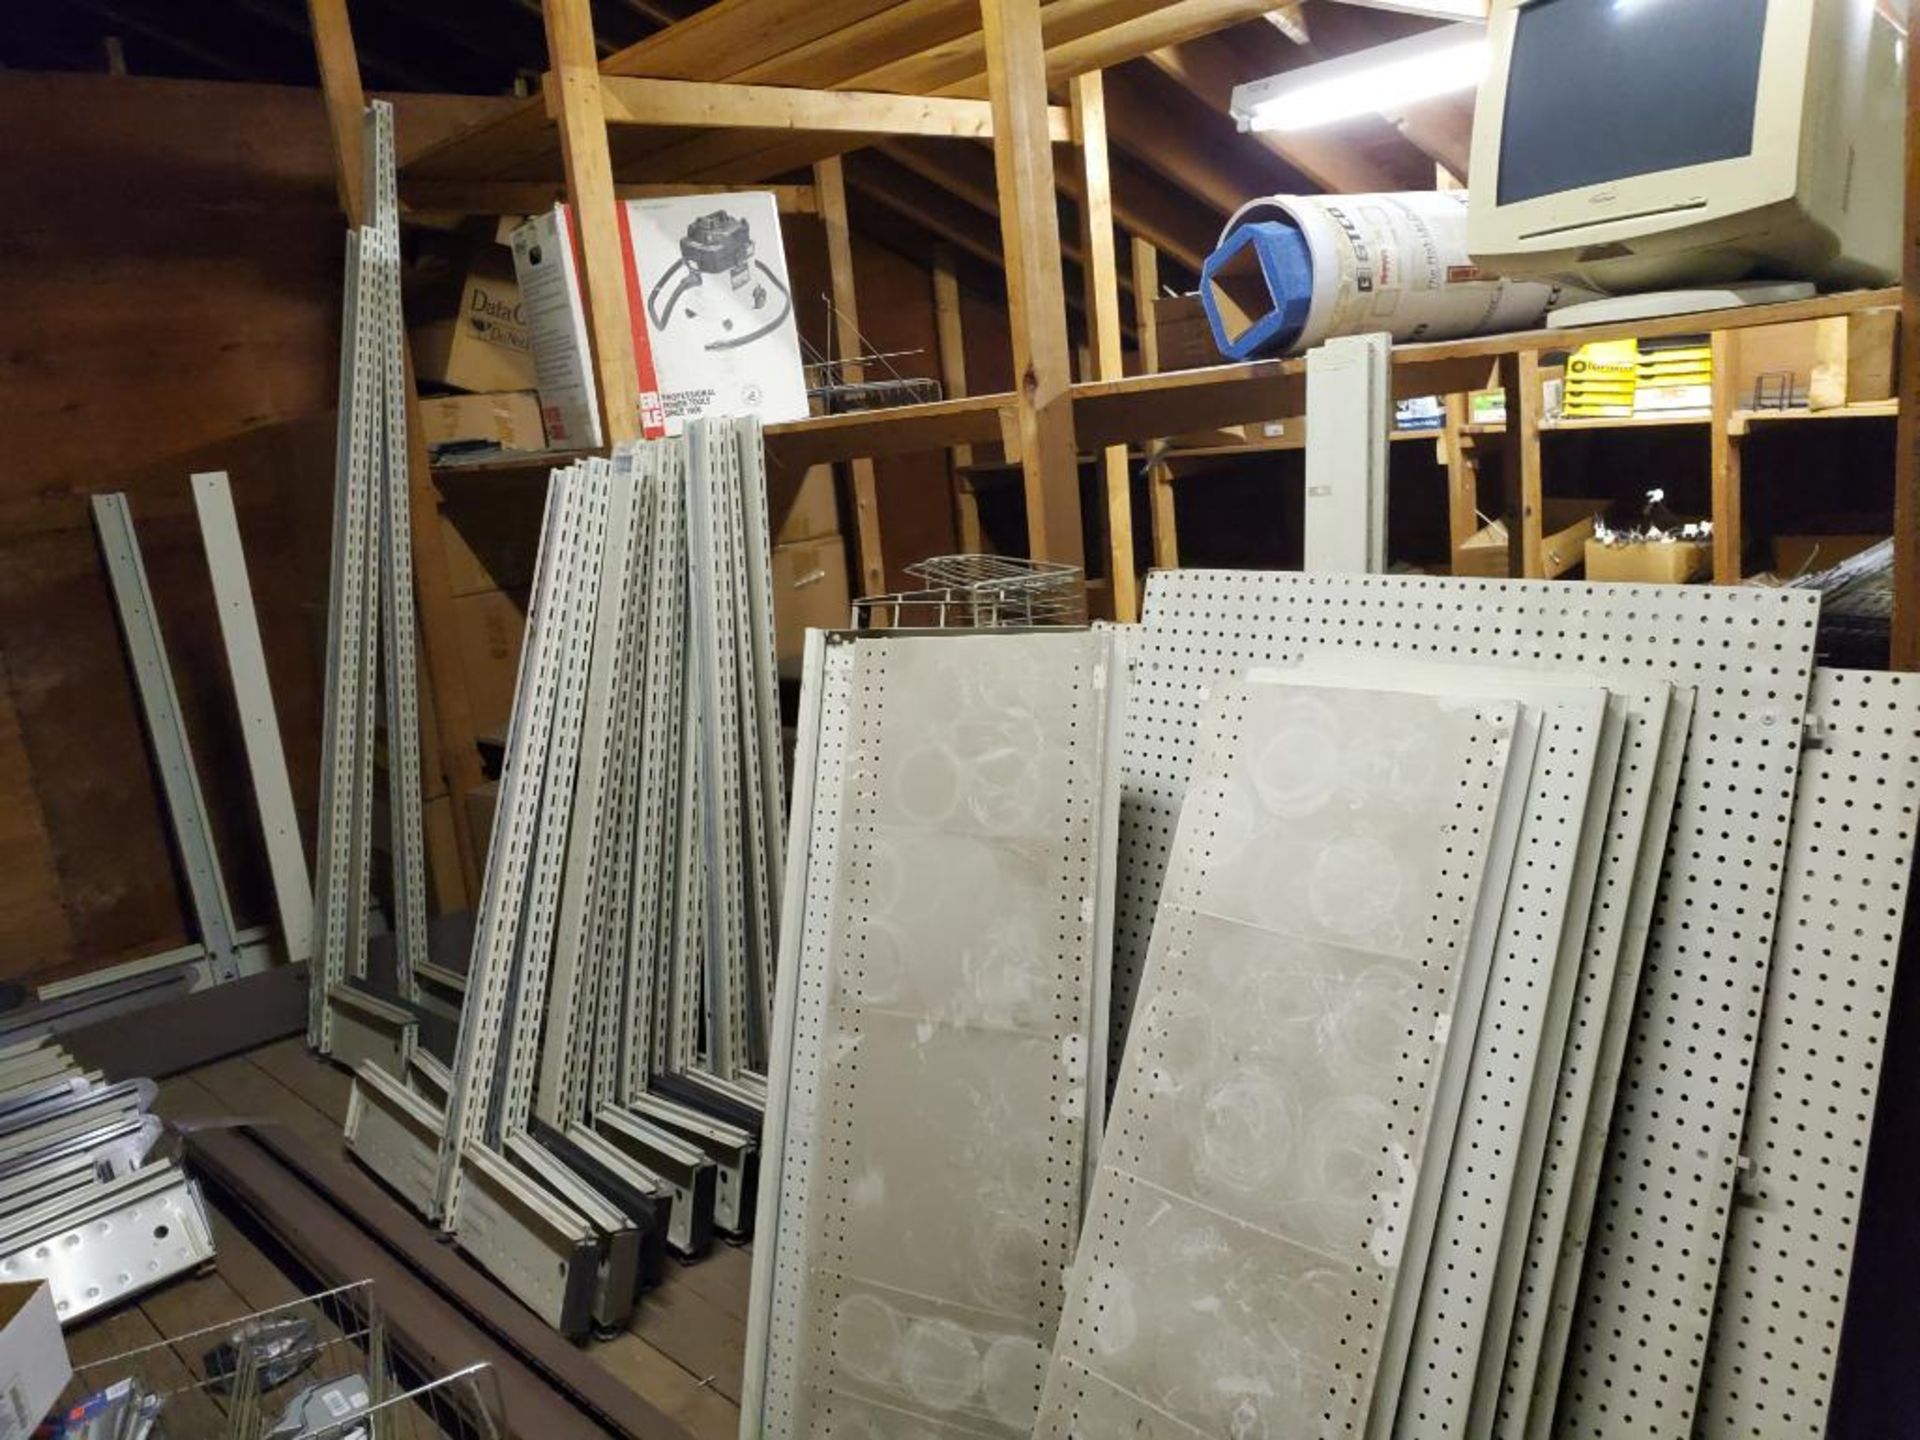 Large assortment of shelving components in attic. - Image 4 of 17